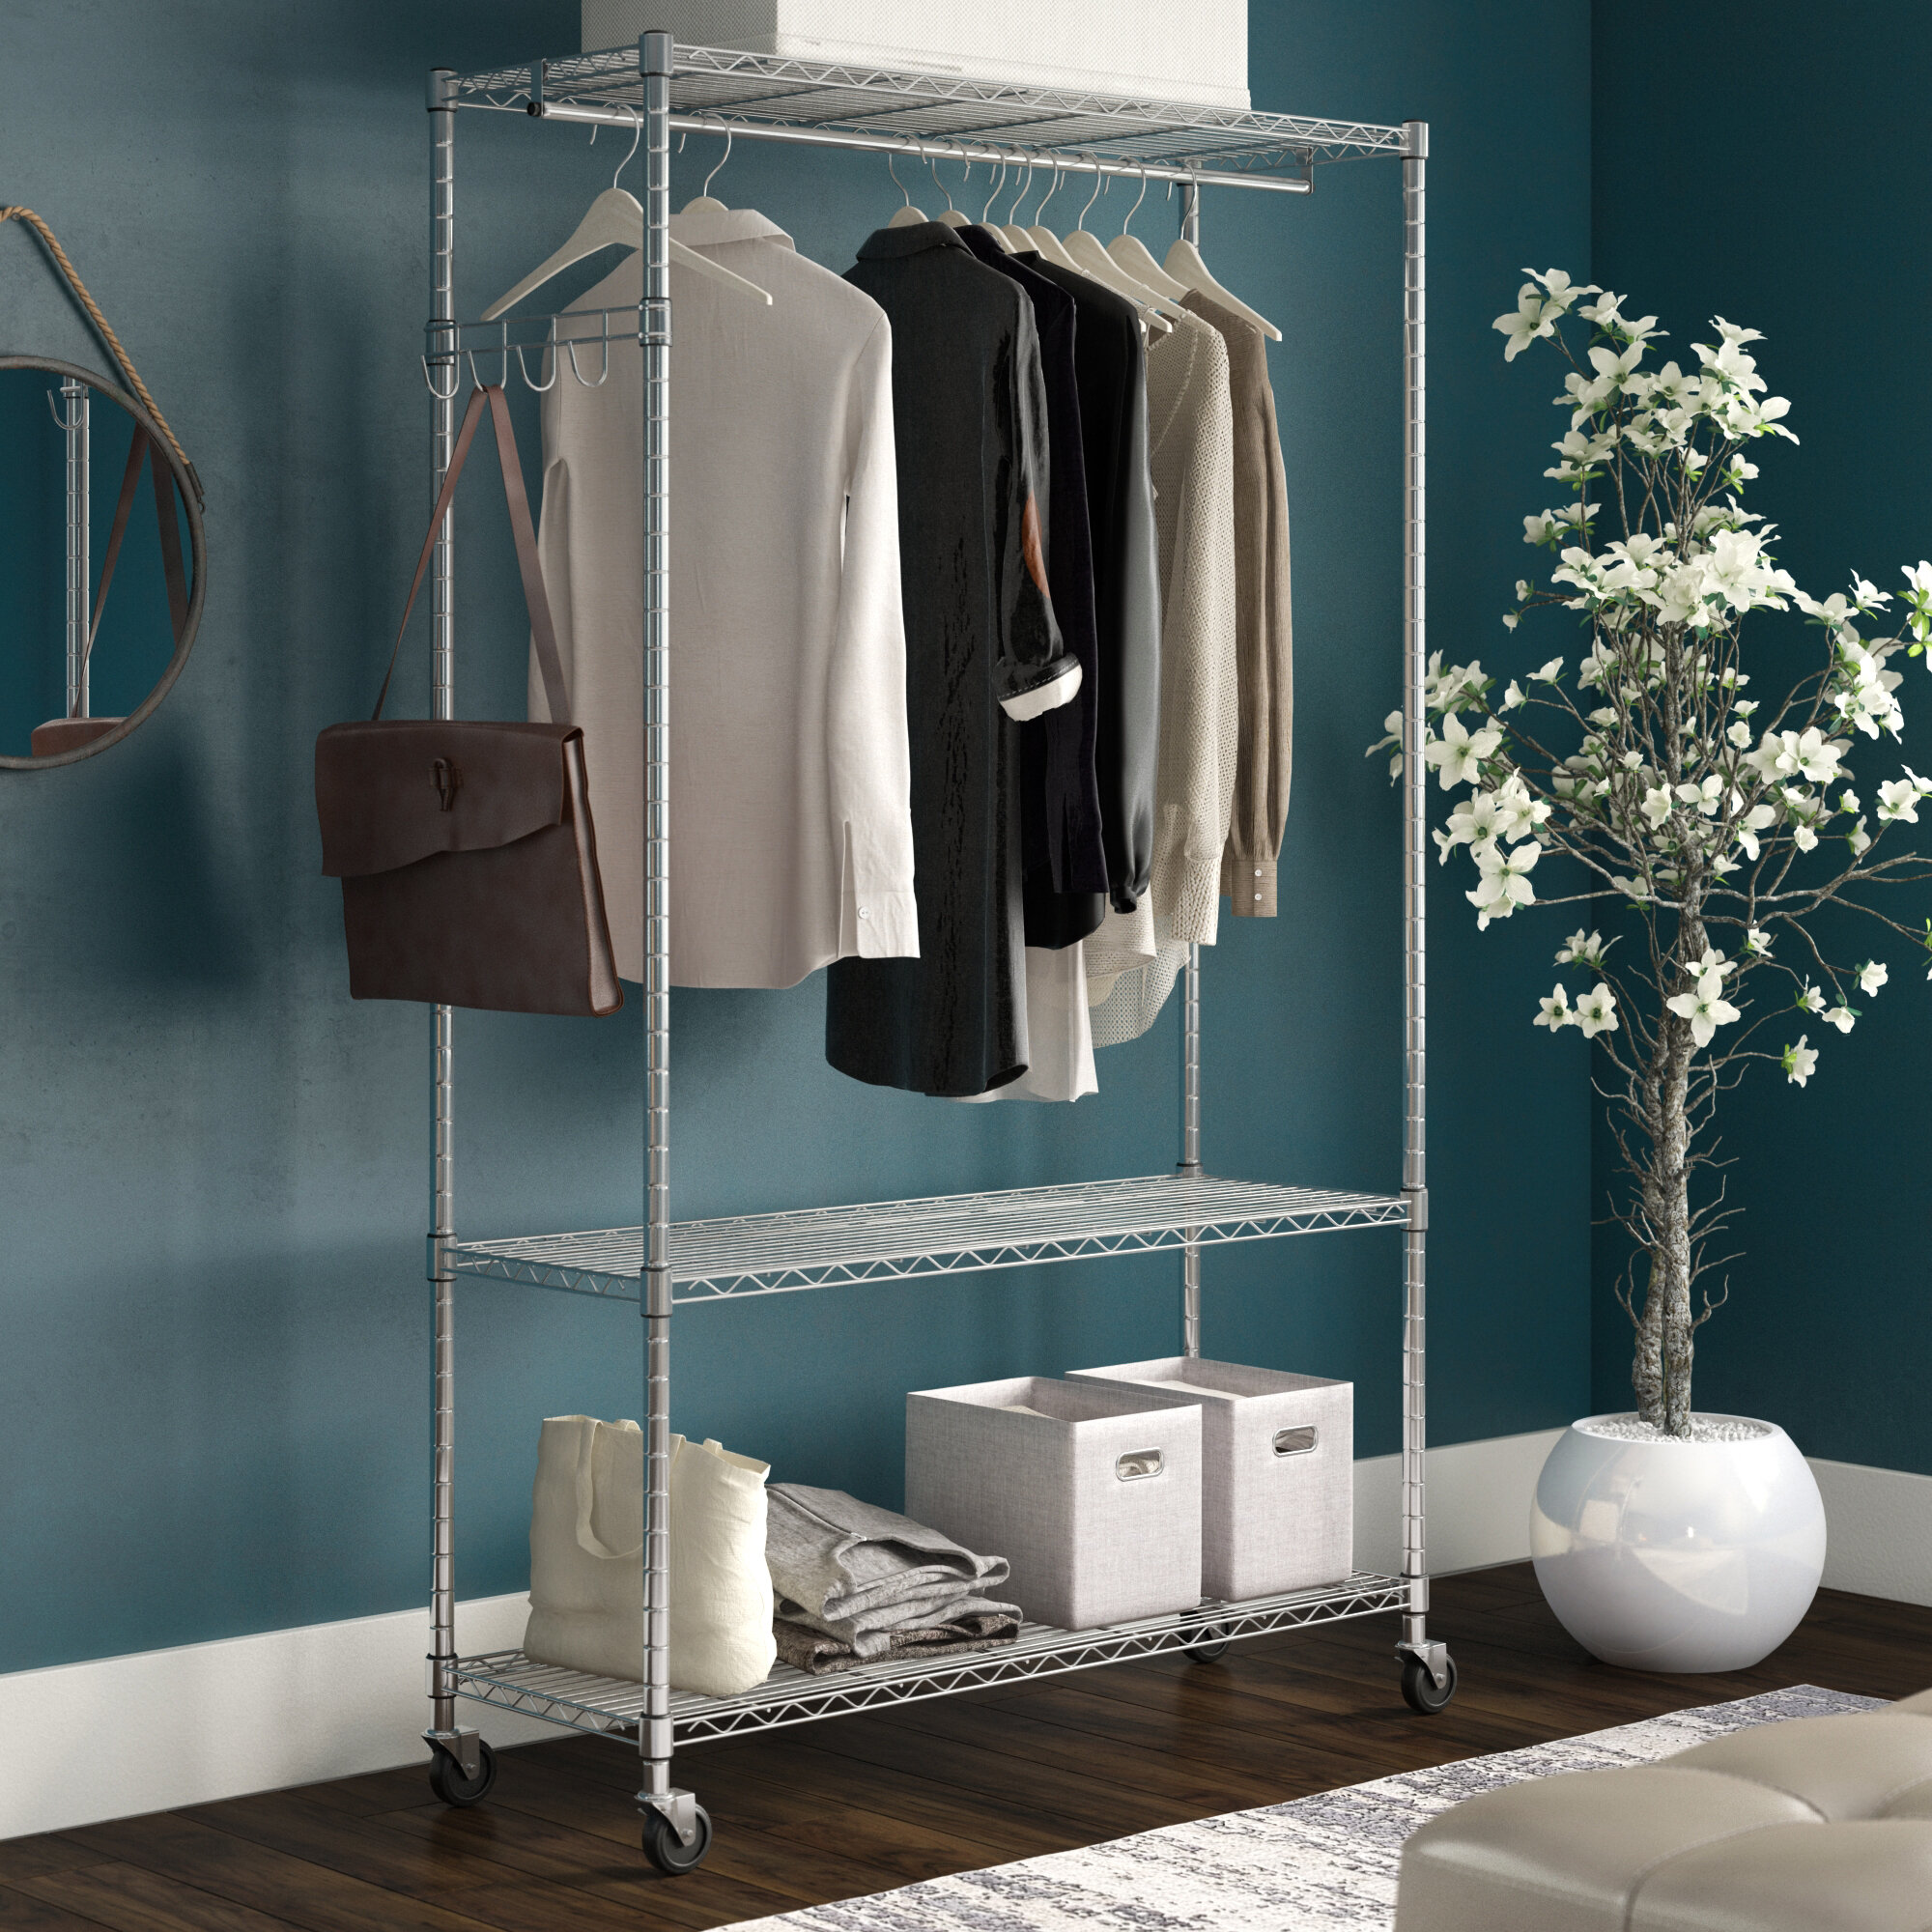 Details about   New Wardrobe With Cover Metal Clothes Rail For Hanging Garments 2020 Xmas M1. 